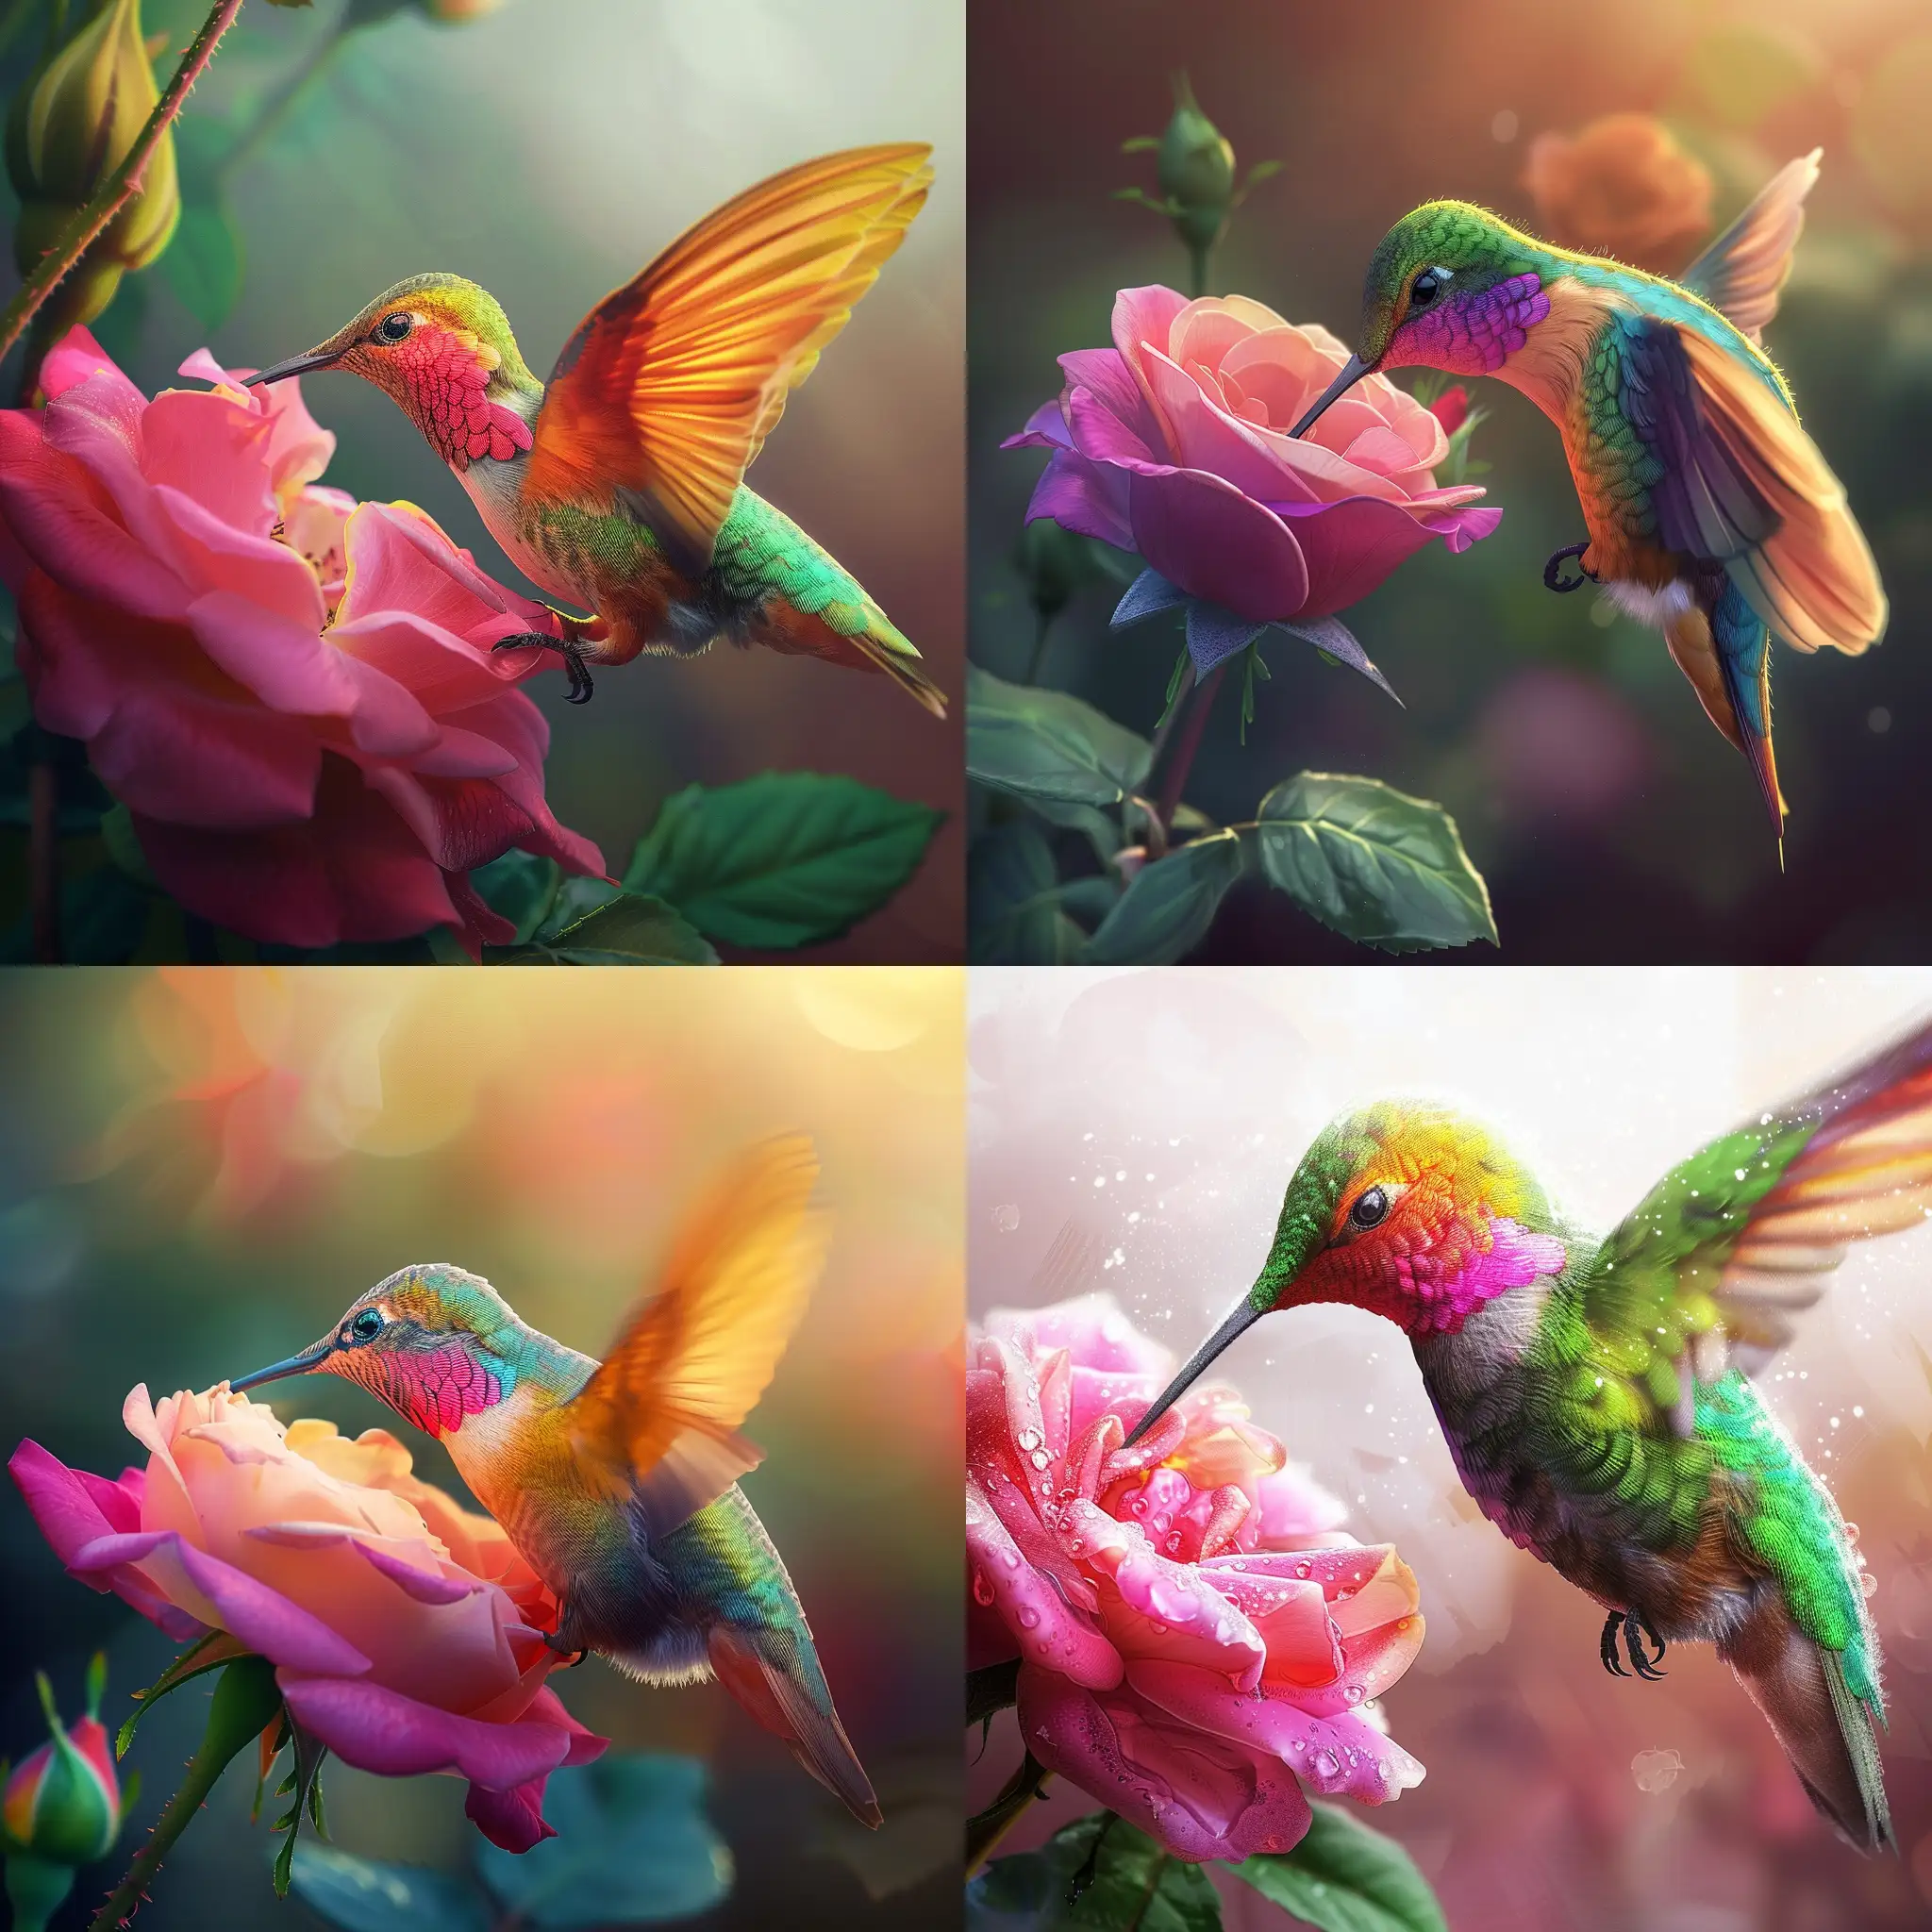 happy, brightly colored hummingbird, eating from a pink rose. this is in the style of a pixar movie